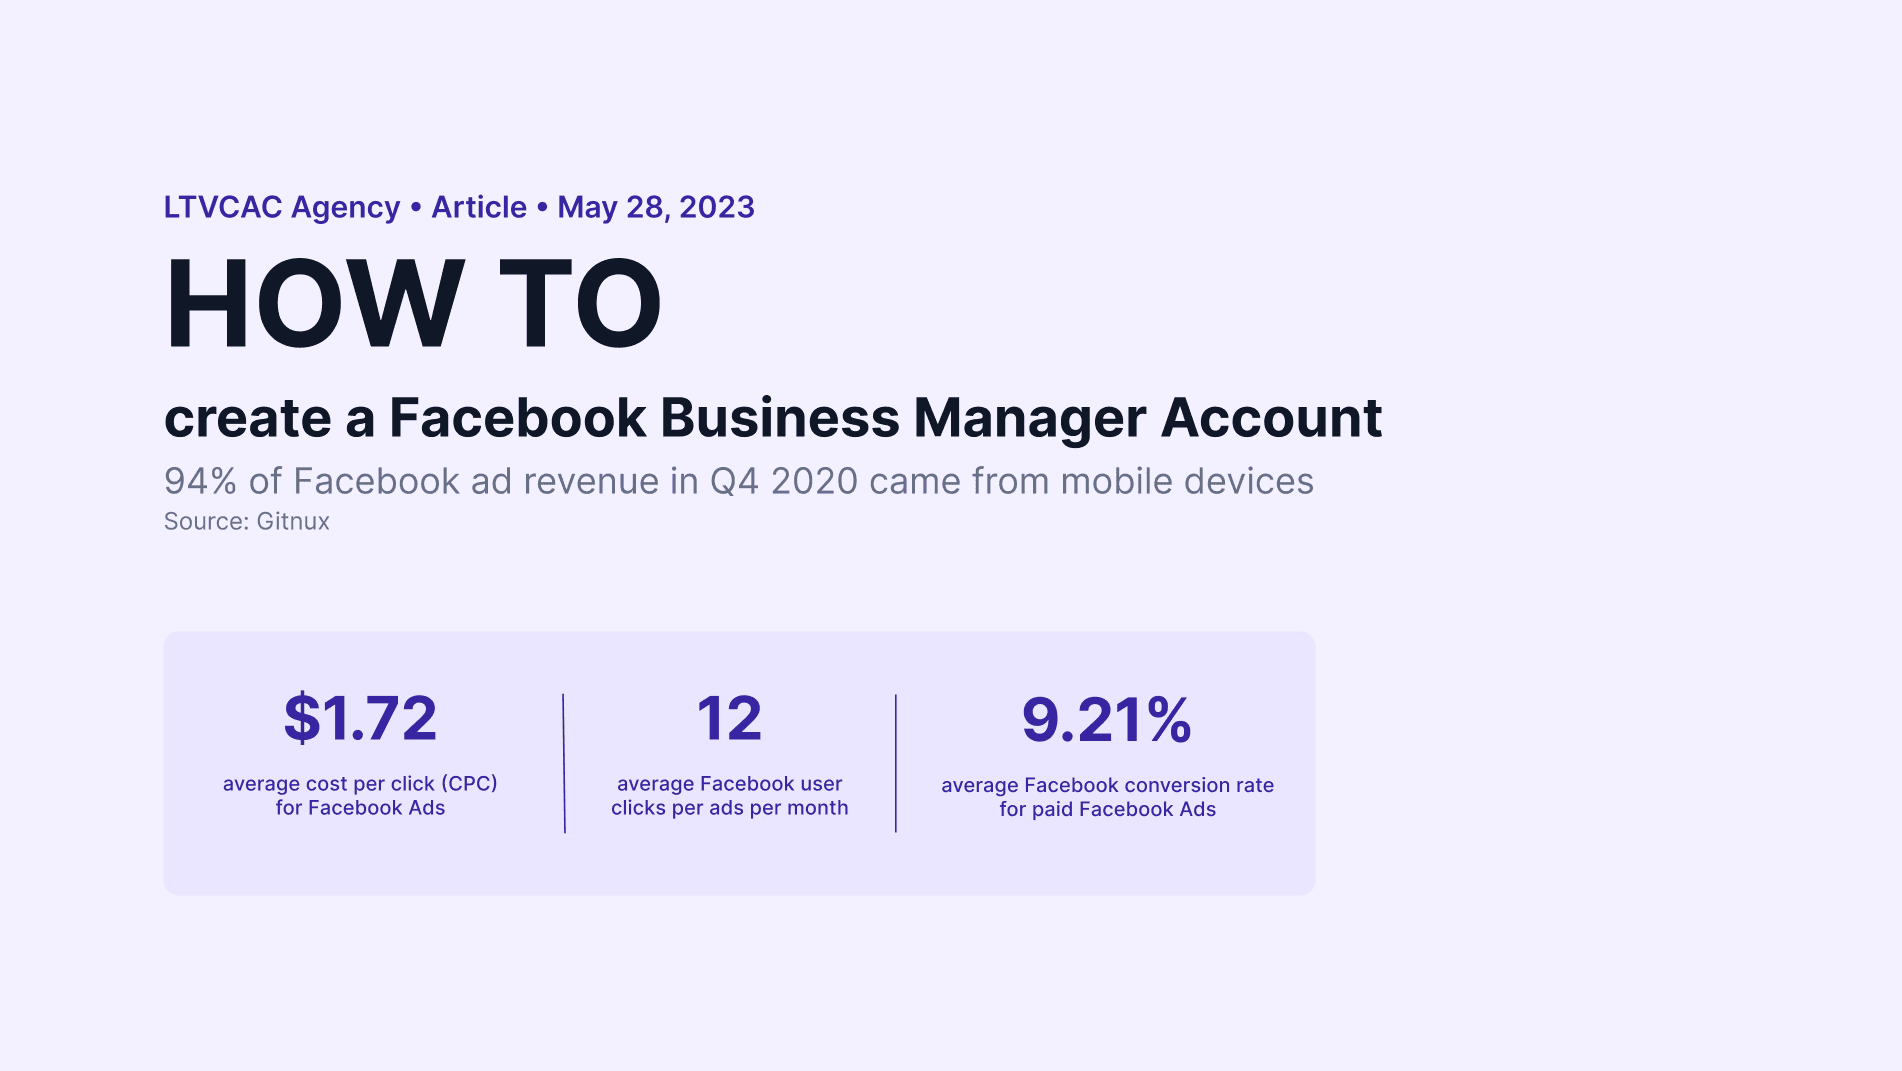 Step-by-Step guide to creating a Facebook Business Manager Account